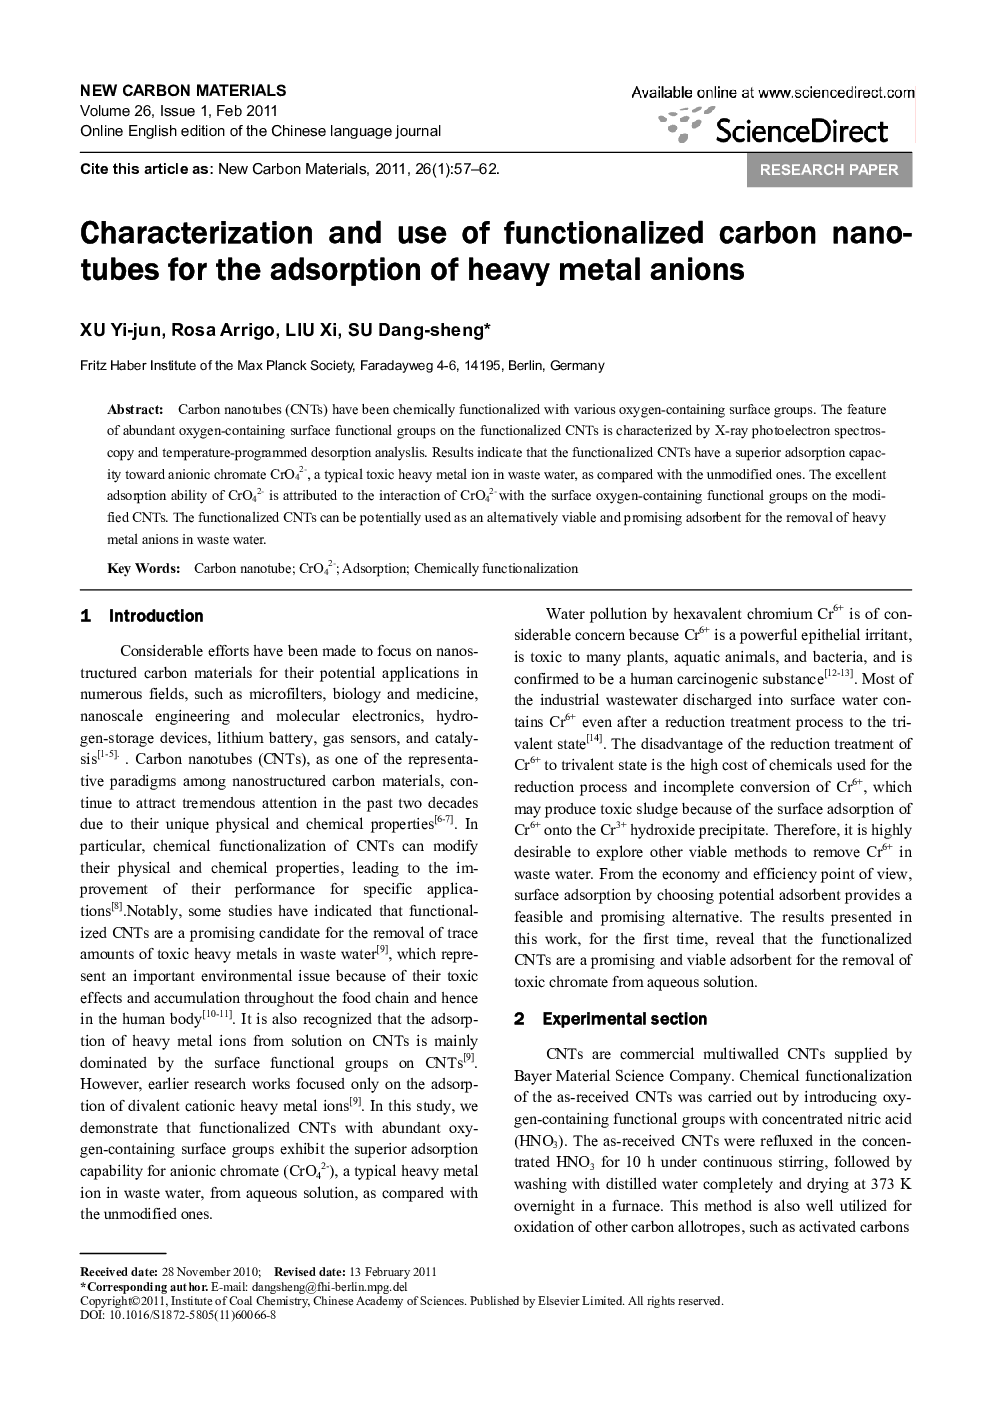 Characterization and use of functionalized carbon nanotubes for the adsorption of heavy metal anions